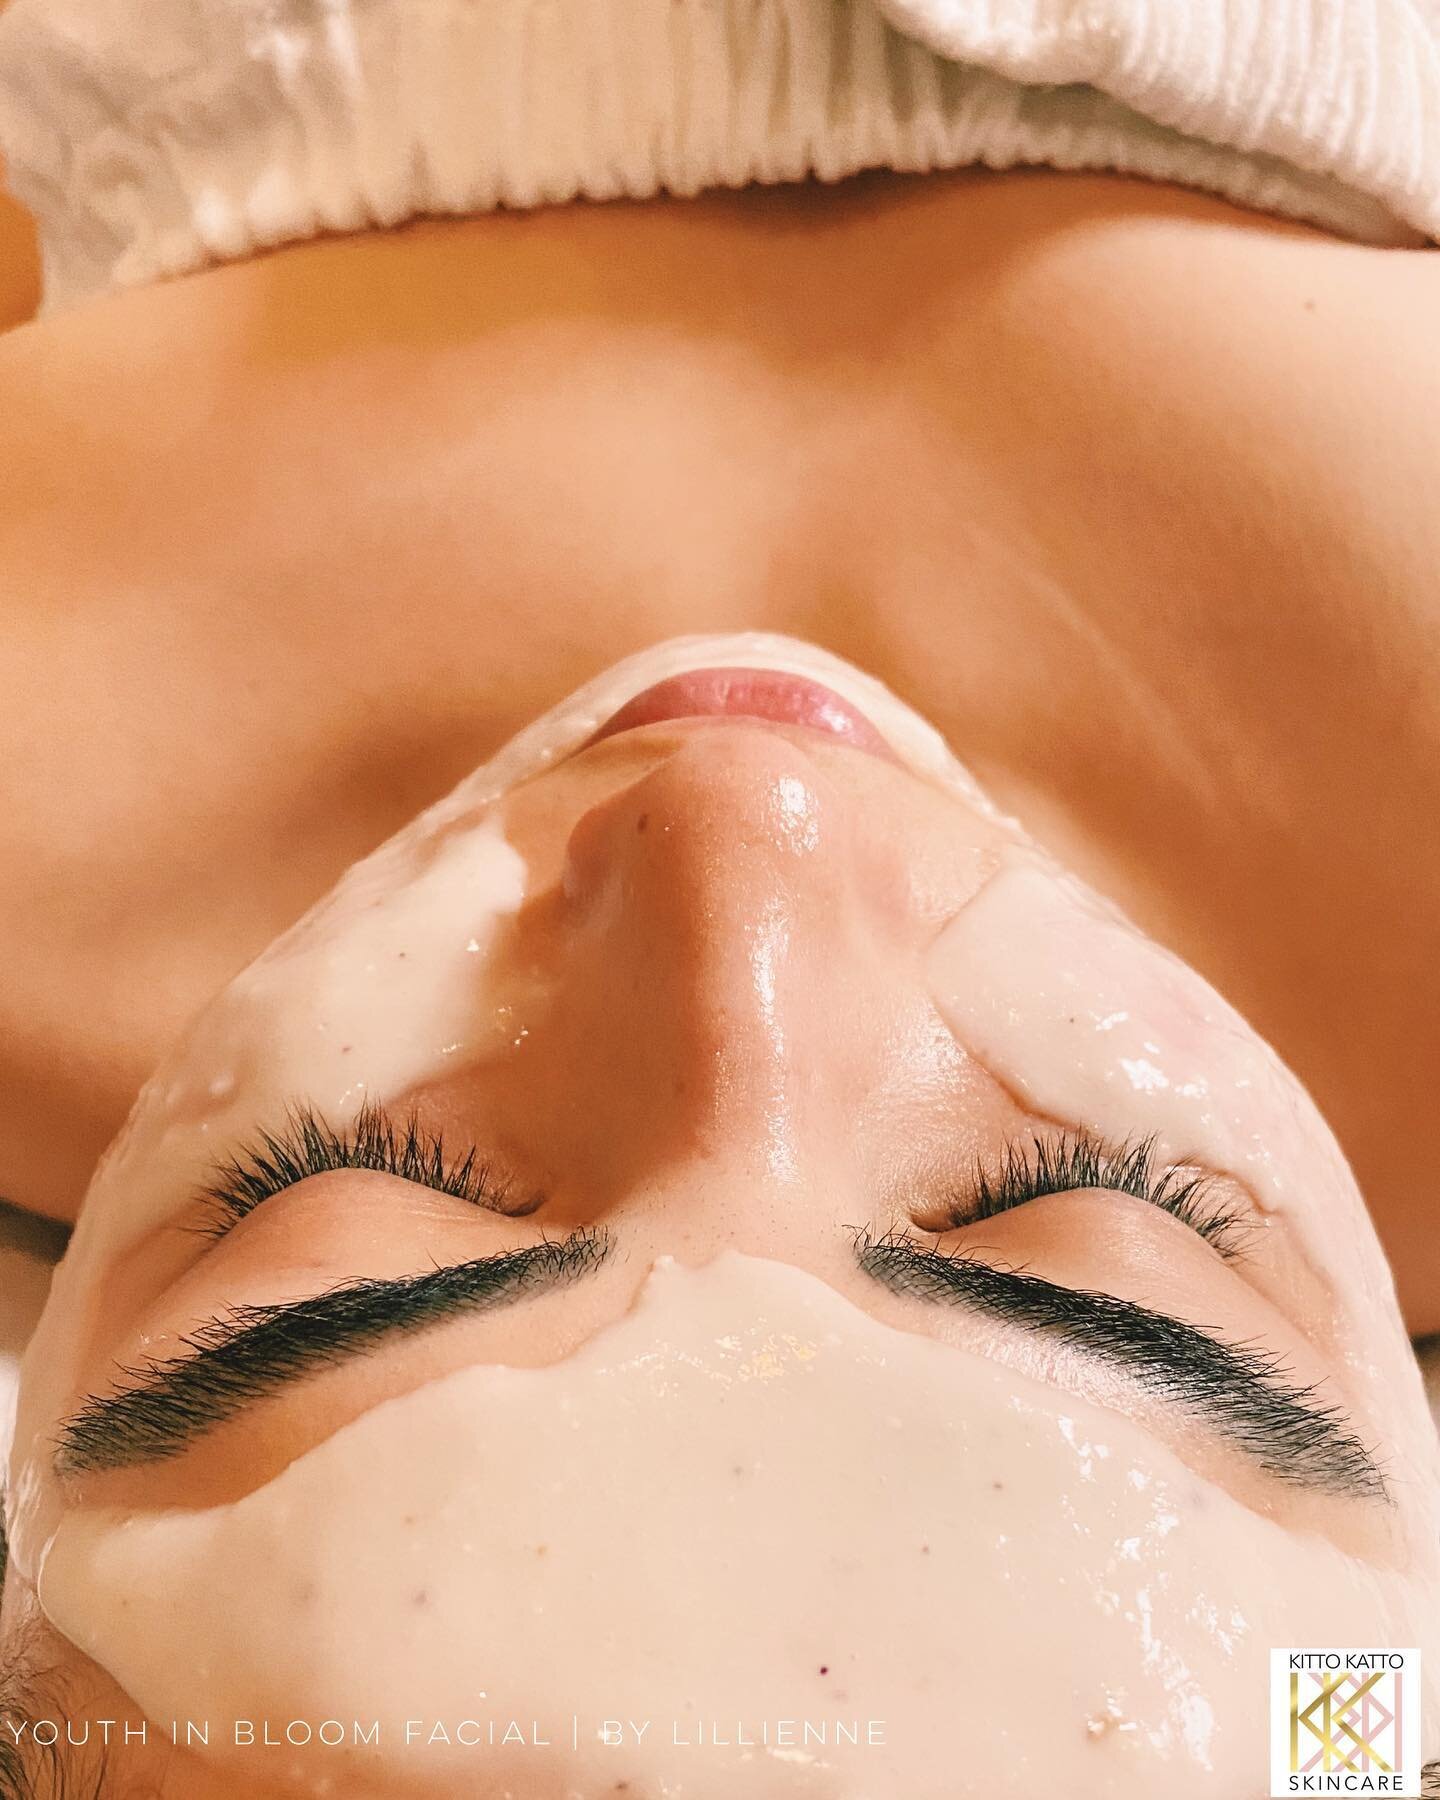 Exfoliate, Brighten, &amp; Glow! Our Youth in Bloom facial is a favourite of mine. This exclusive facial includes a dermaplane with our wildly popular Youth in Bloom beauty oil.  Eliminate peach fuzz and exfoliate your skin all while enjoying an arom